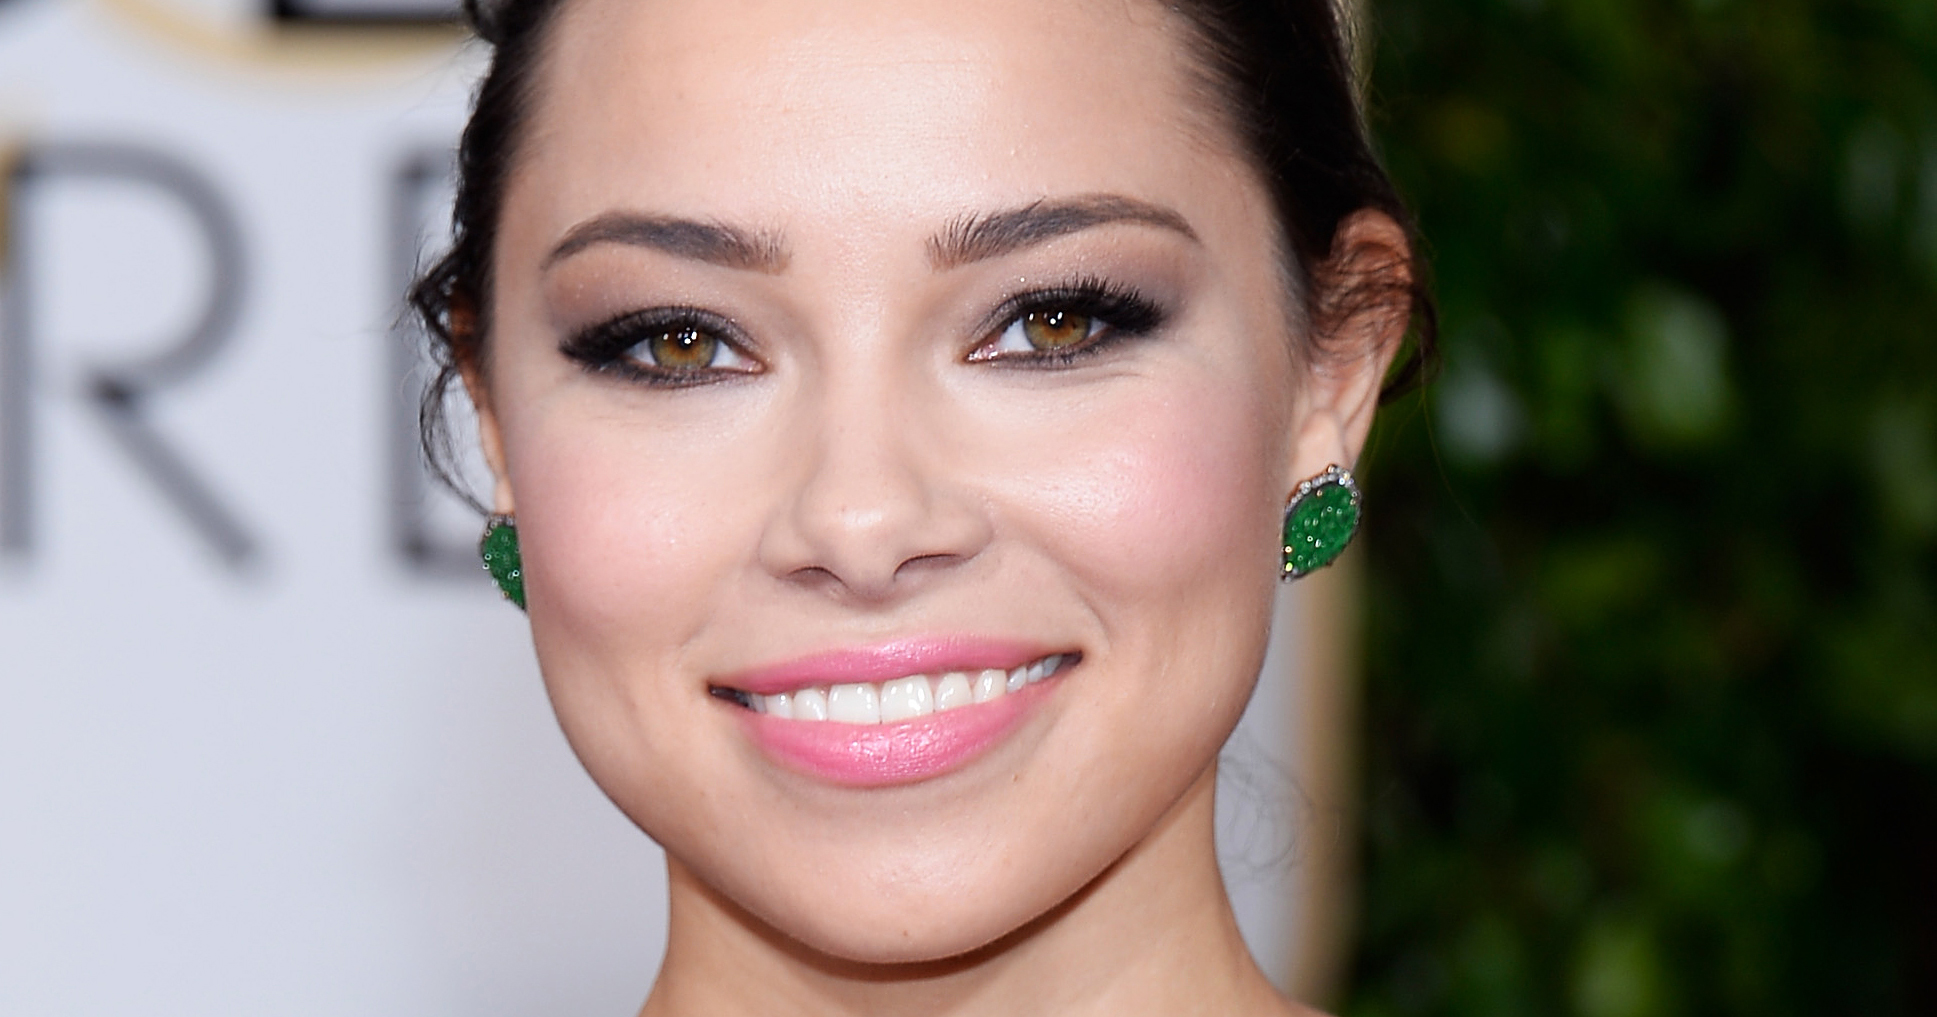 carlos pryor recommends jessica parker kennedy rape pic